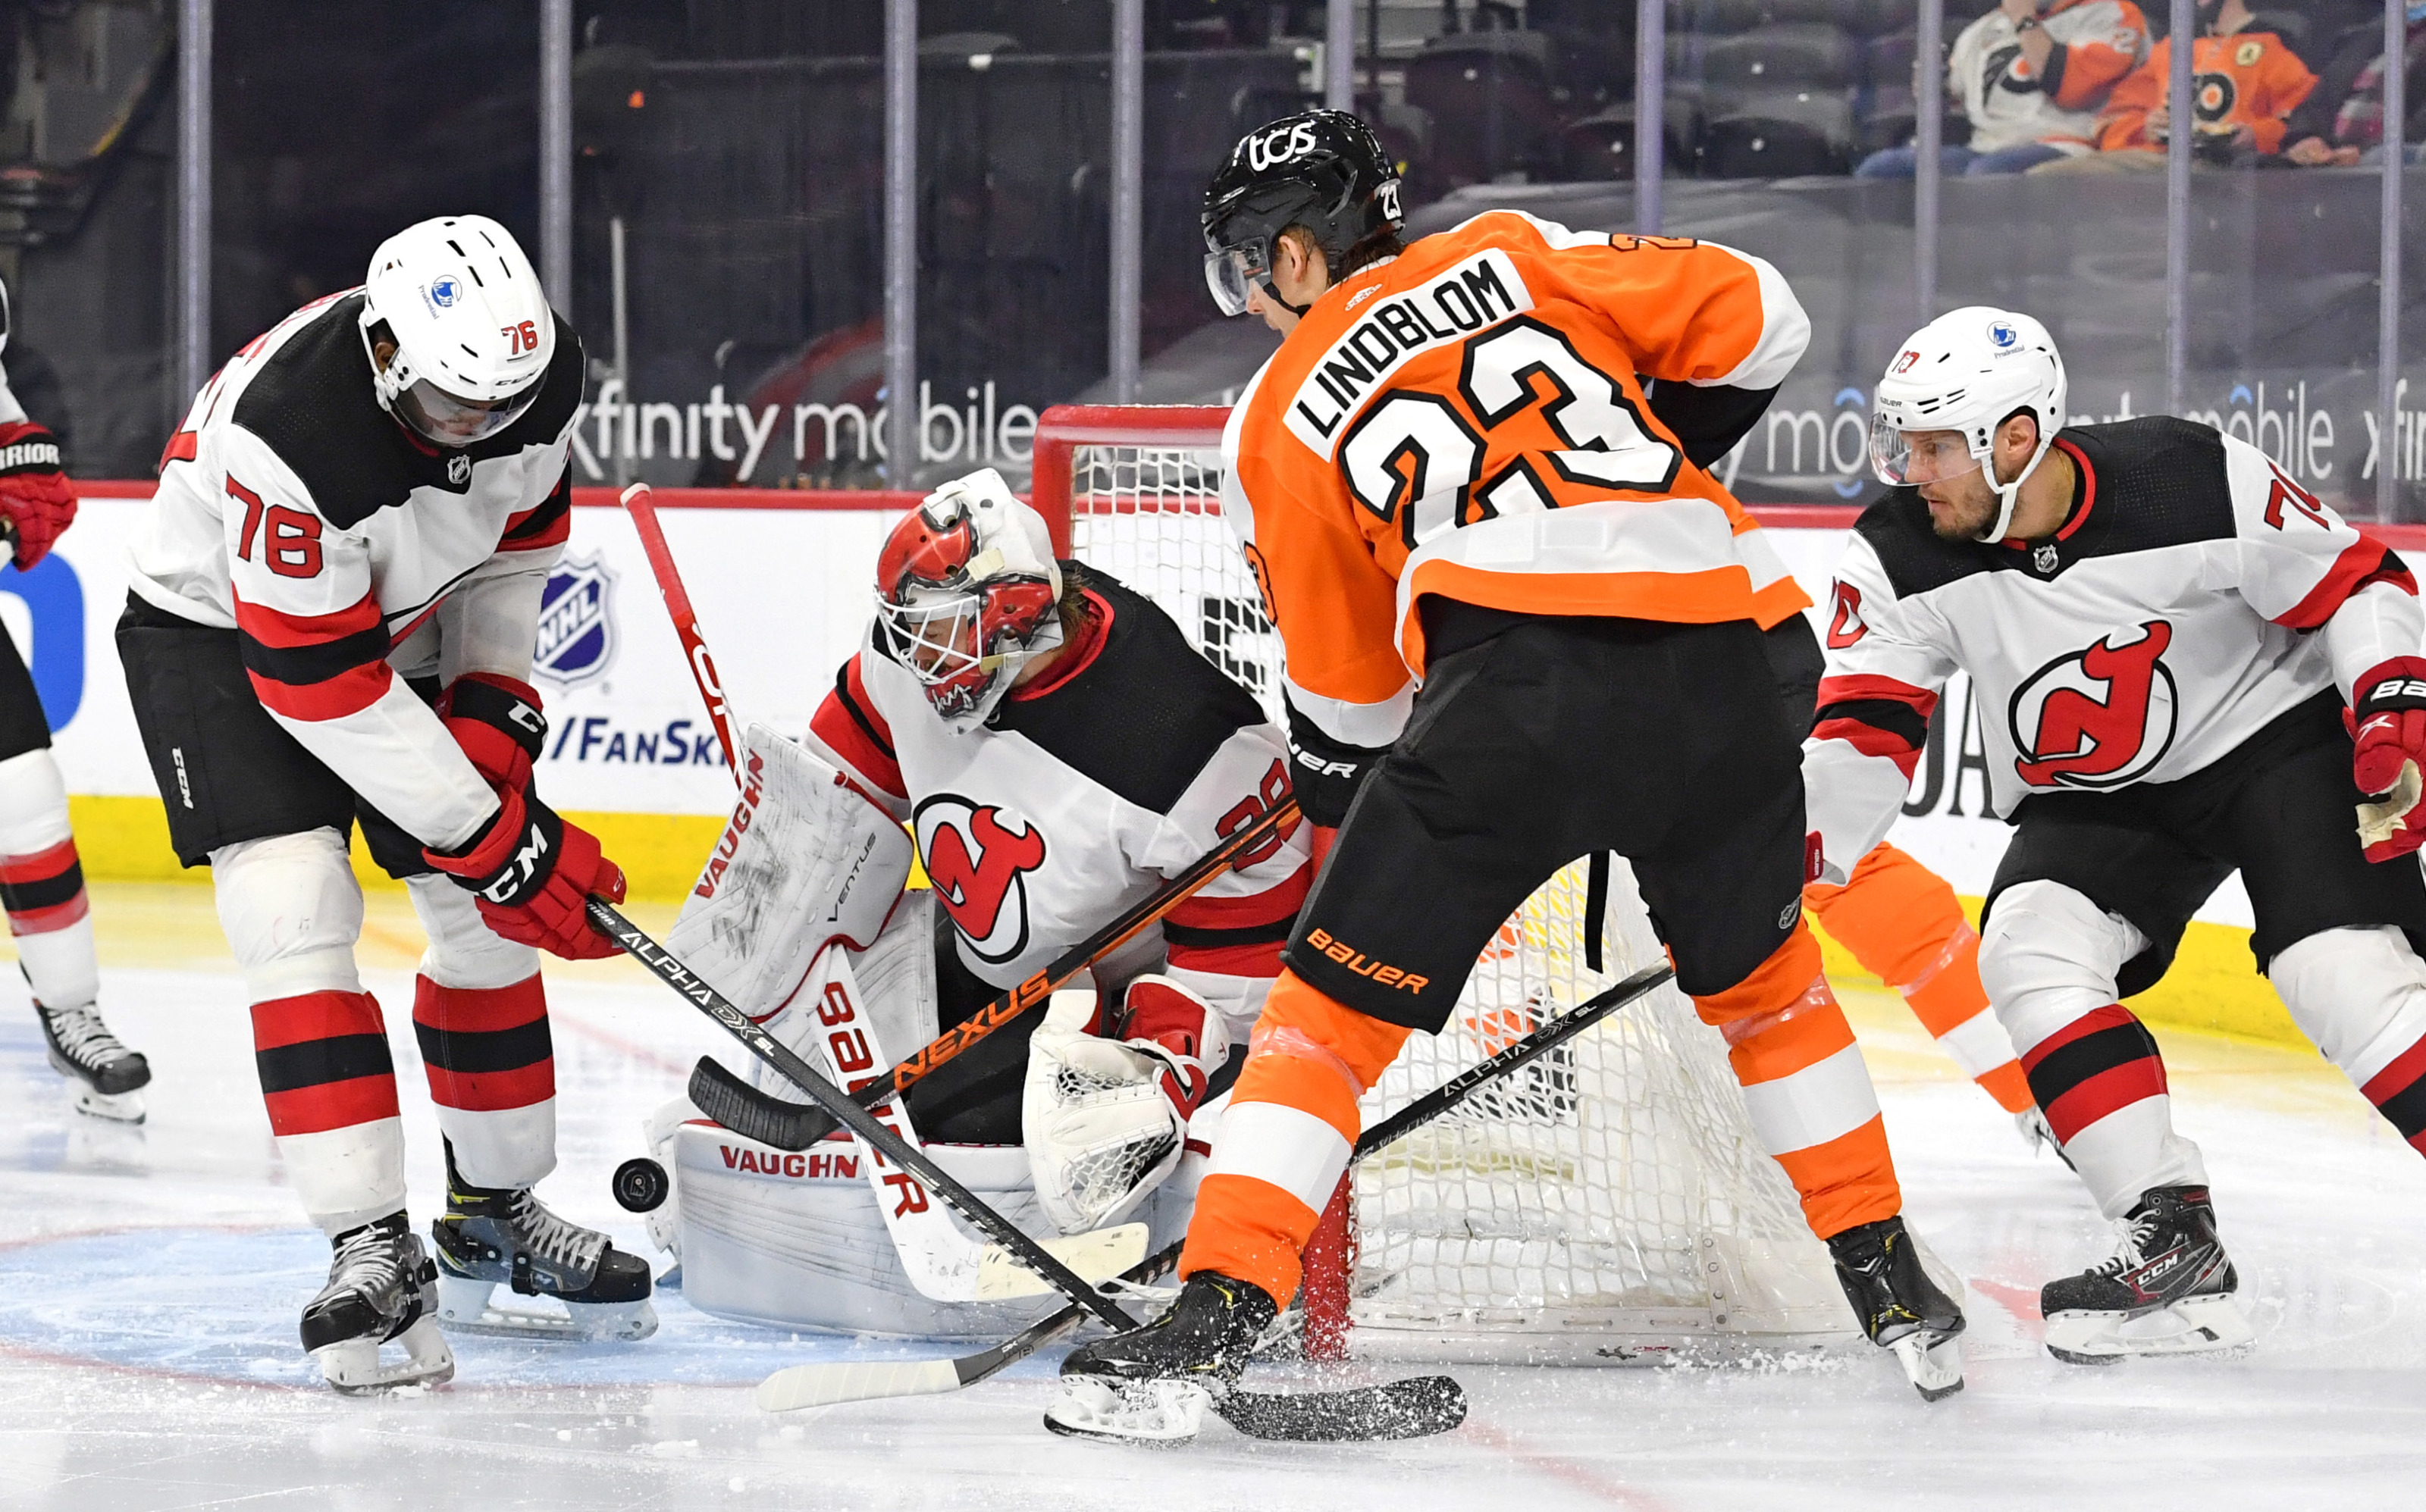 Flyers end crushing season with 4-2 win over Devils